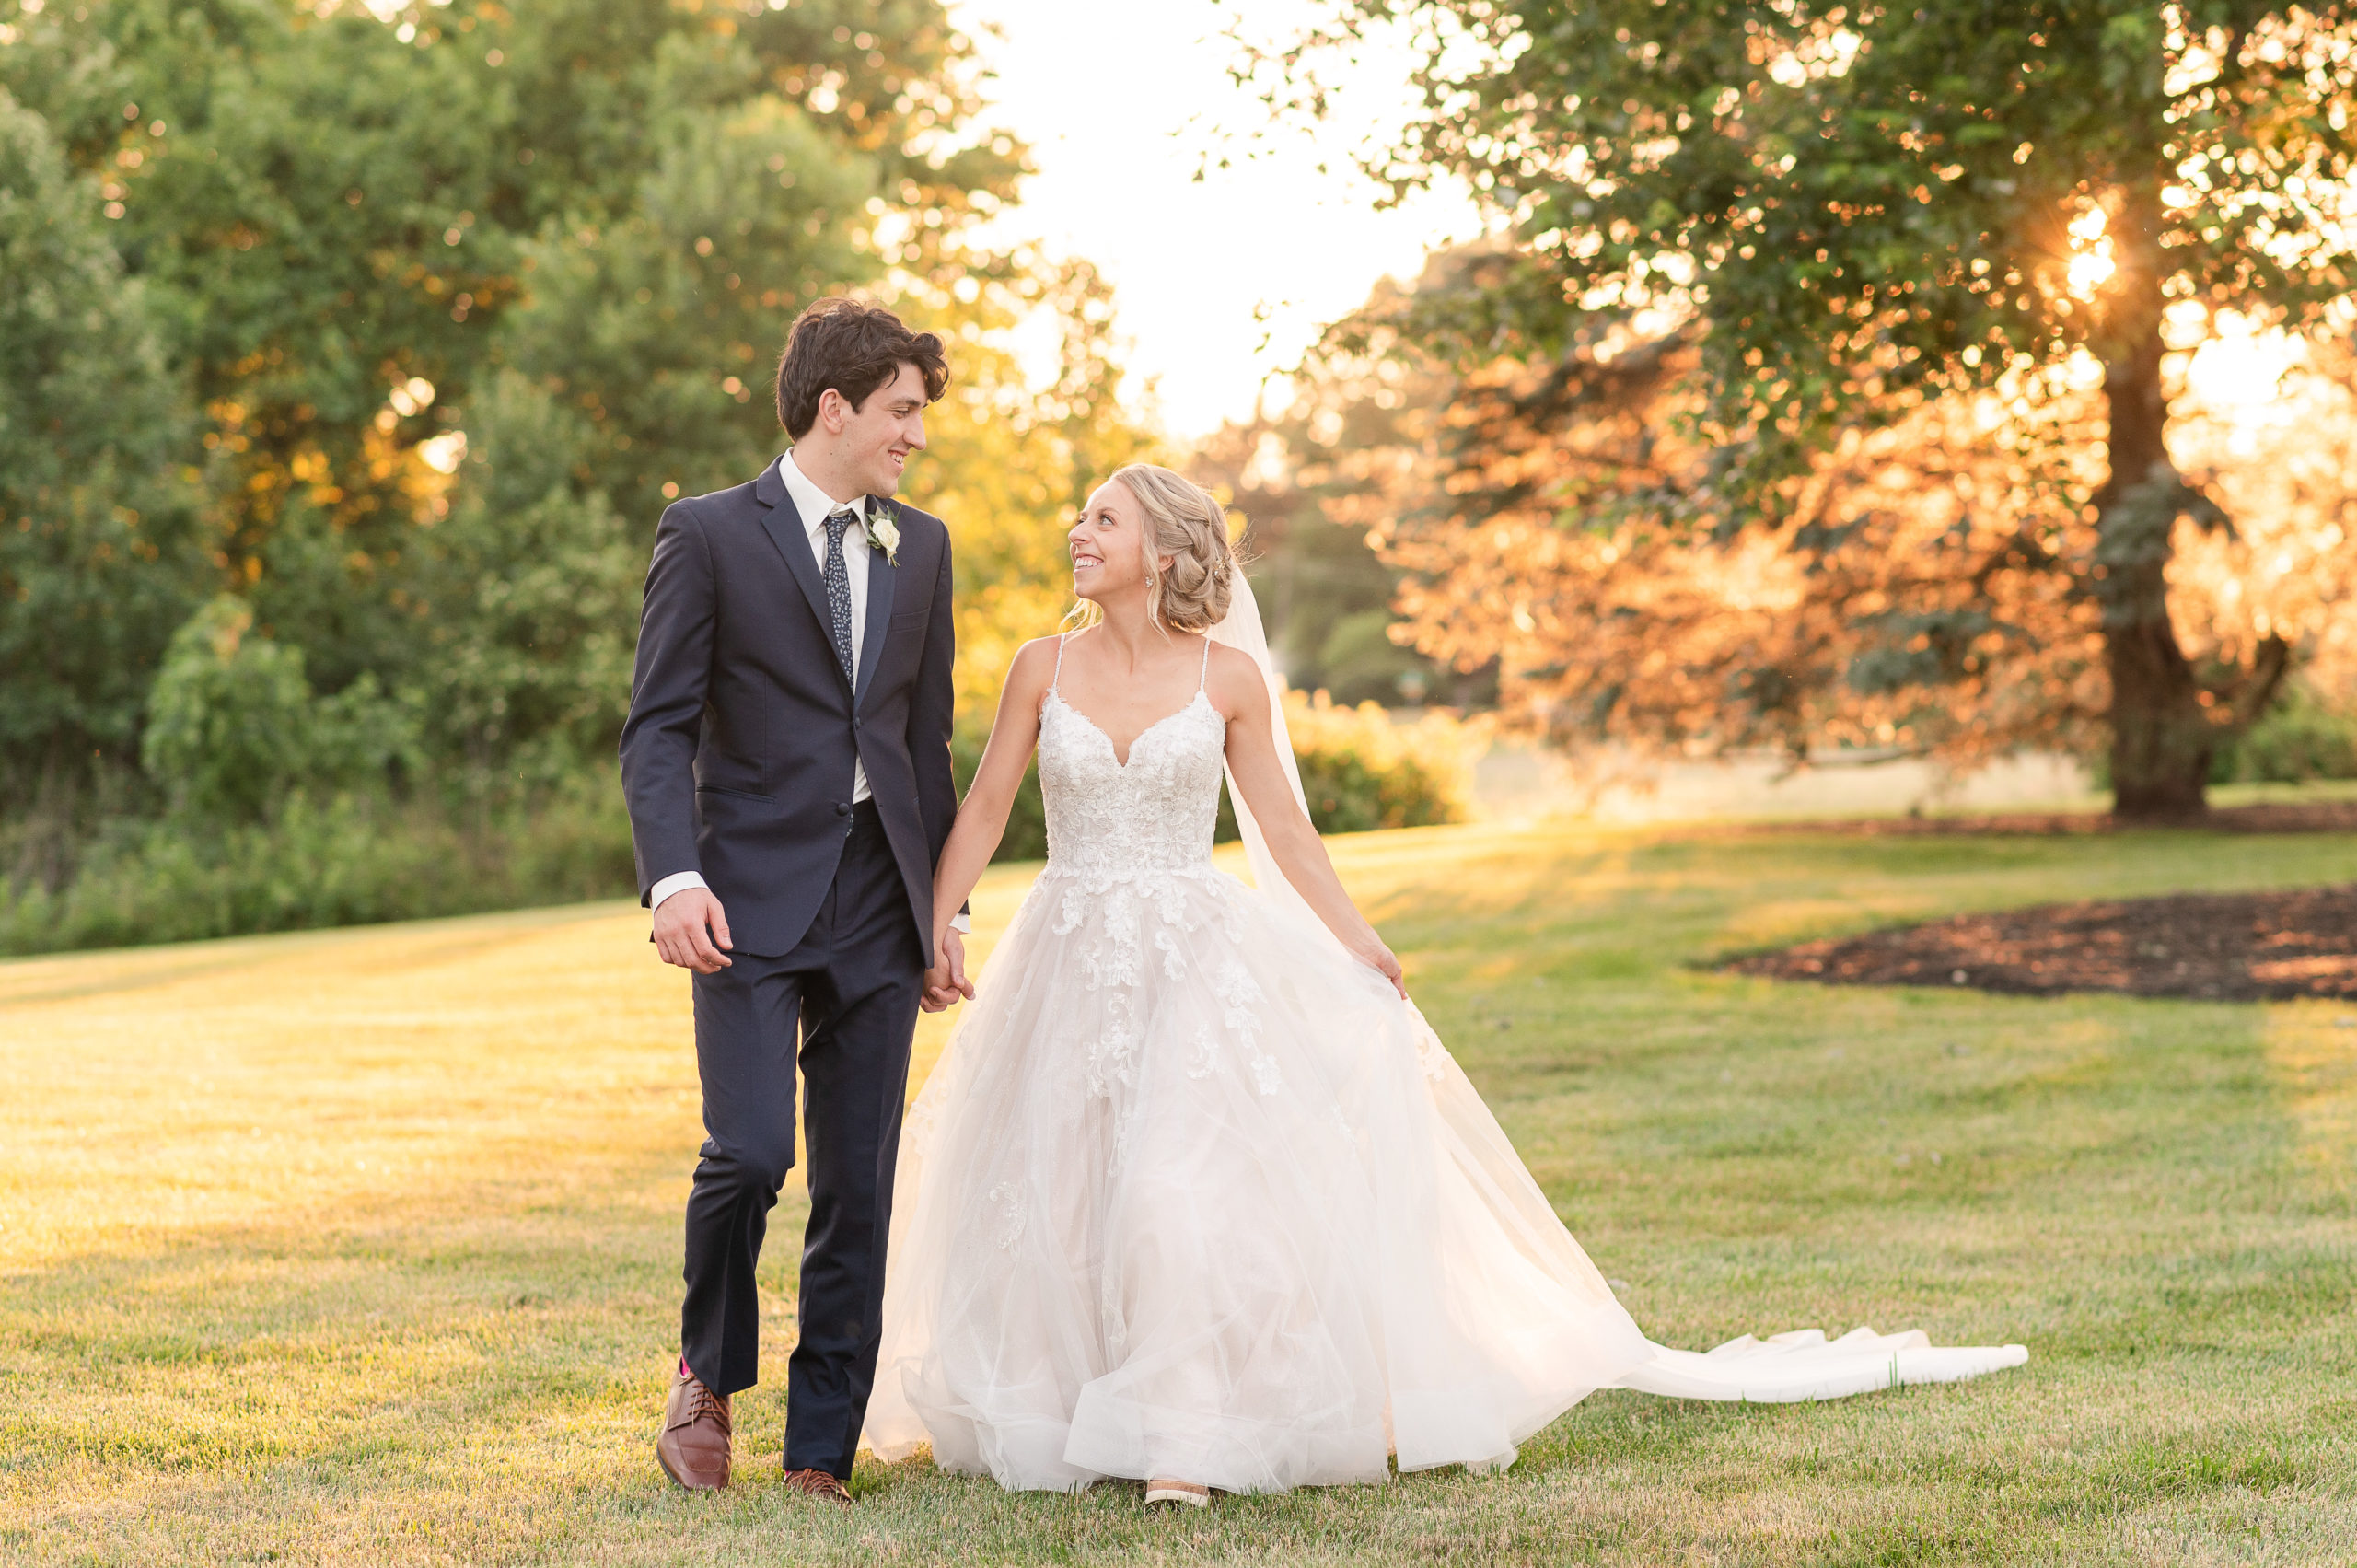 Wedding at the Mustard Seed Gardens, Noblesville, IN, Noblesville wedding photograher, 